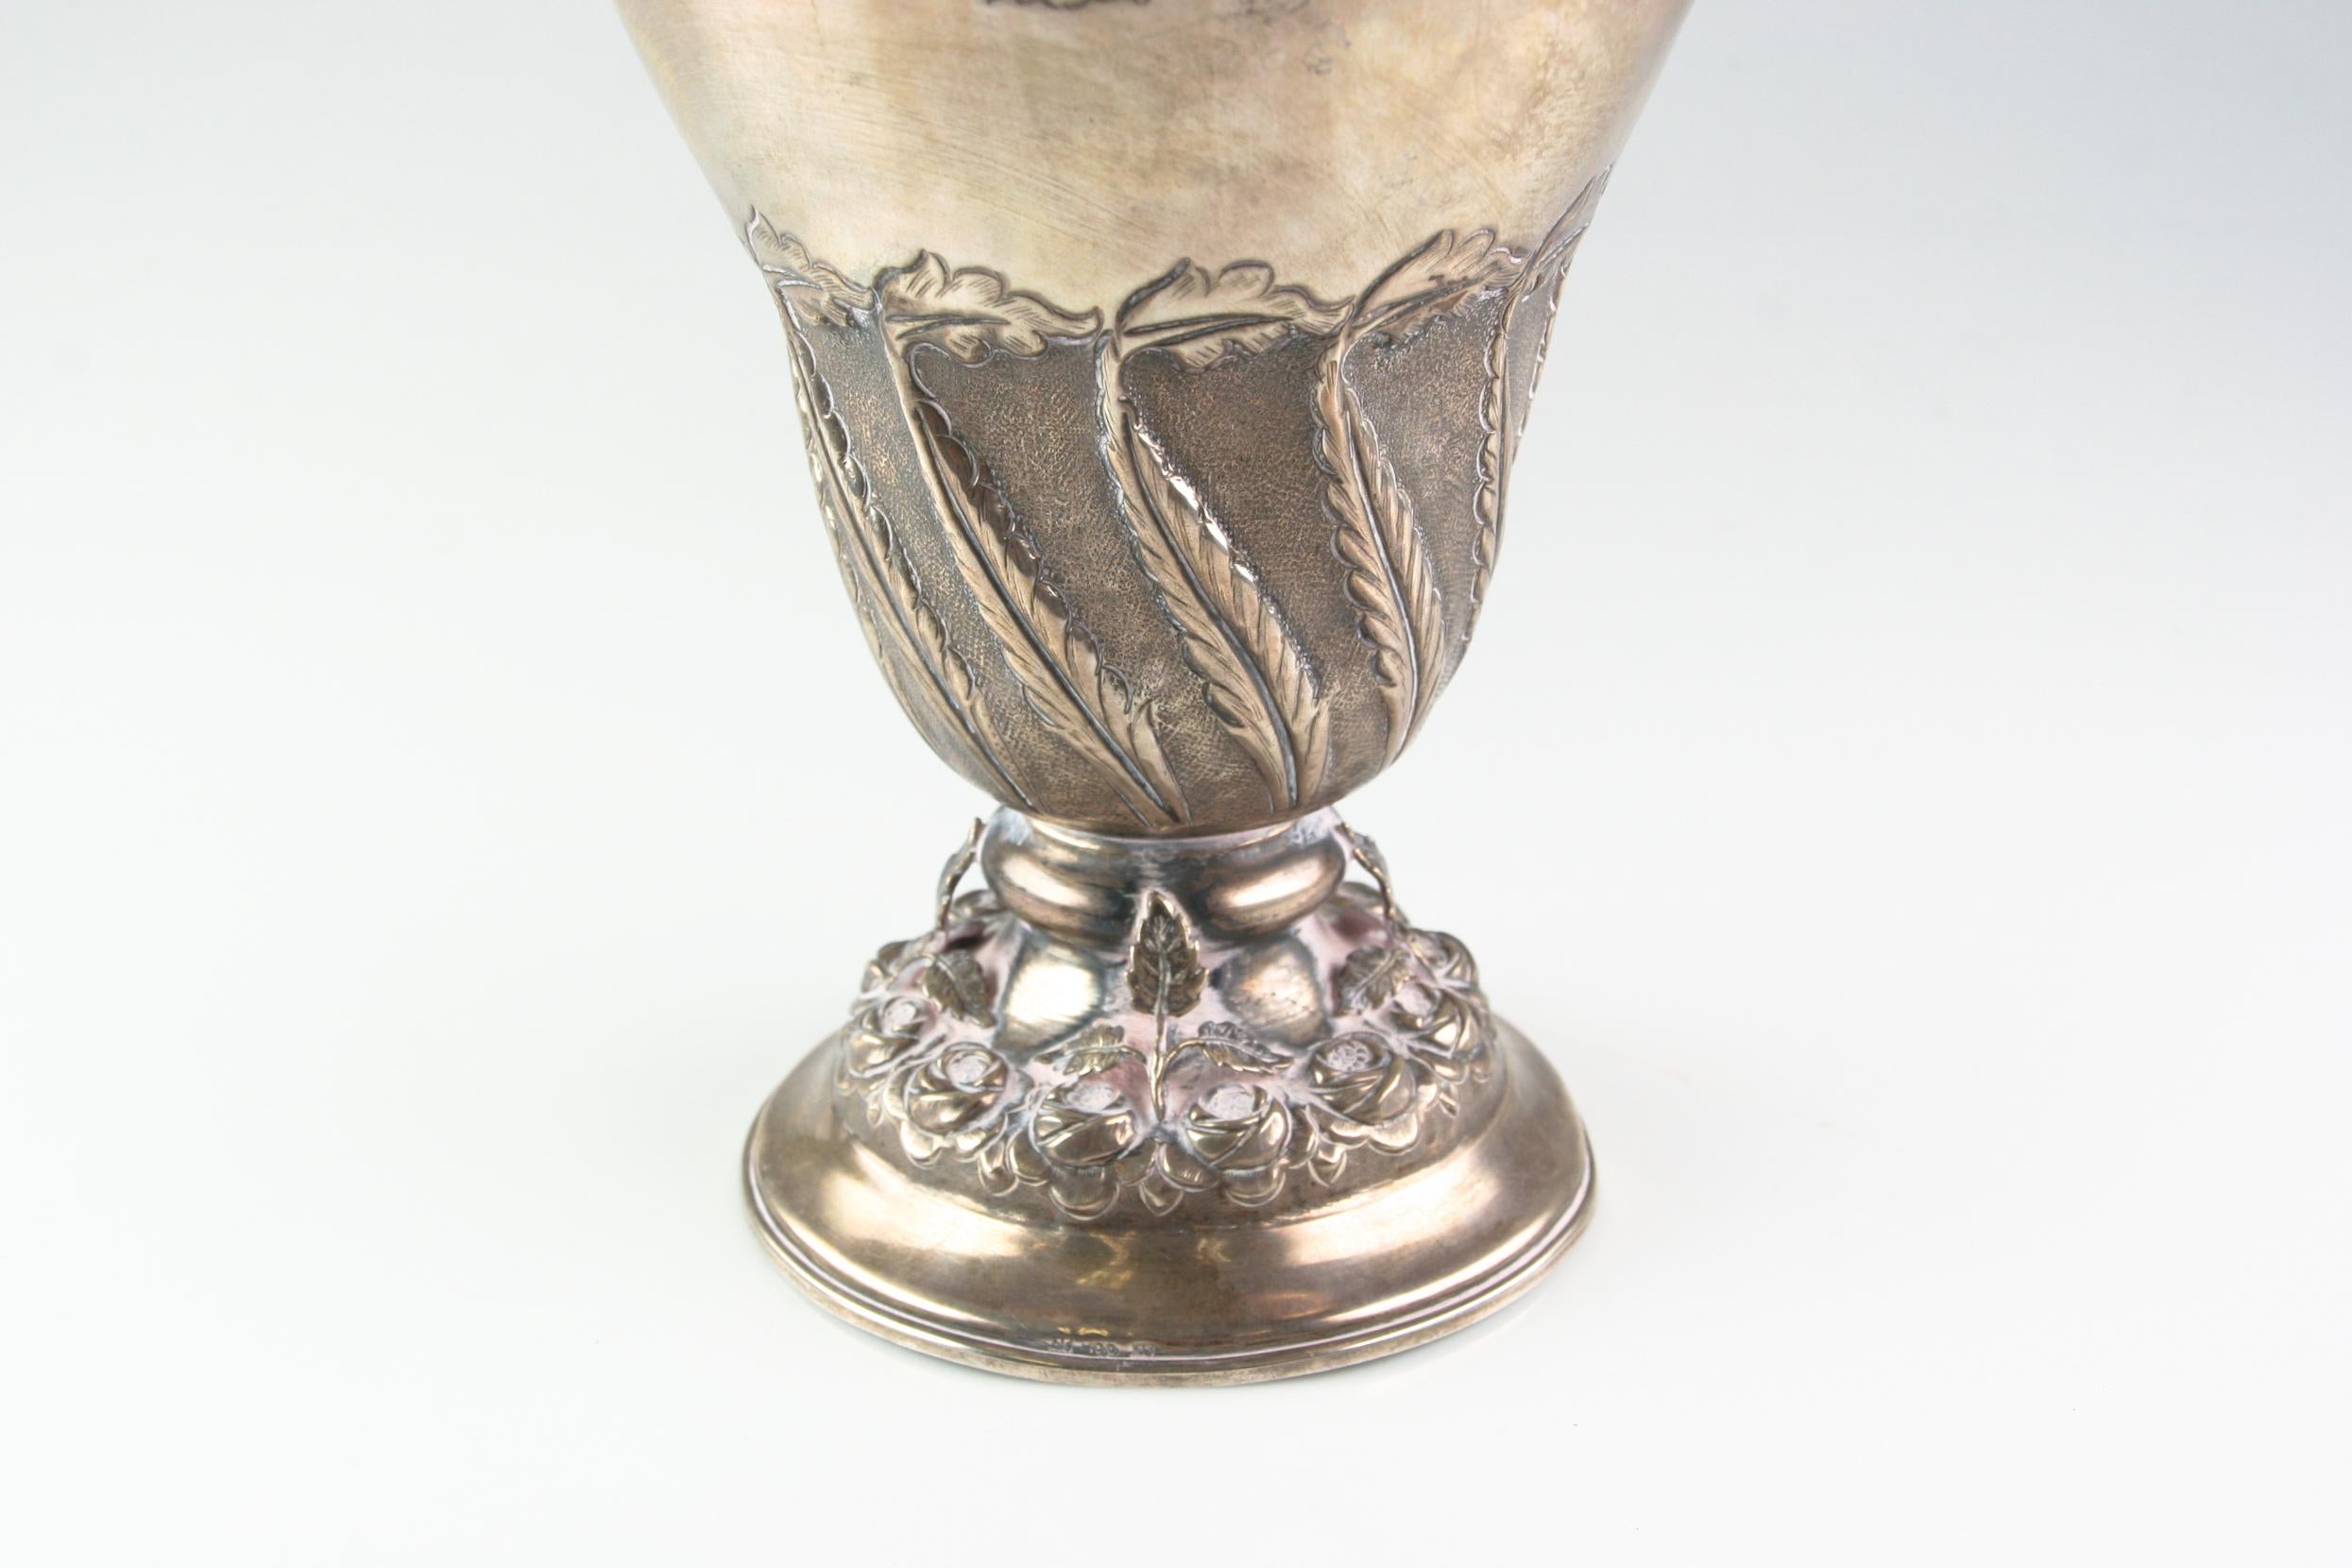 Art Nouveau Design Featuring Naturalistic Fruiting 3-D Vines, Leaves and Roses. Ornate Handle with Cherub seated. 
Ewer water pitcher hand crafted out of 900 Silver
Condition: Over all good condition some old repairs are noticeable on the plate.